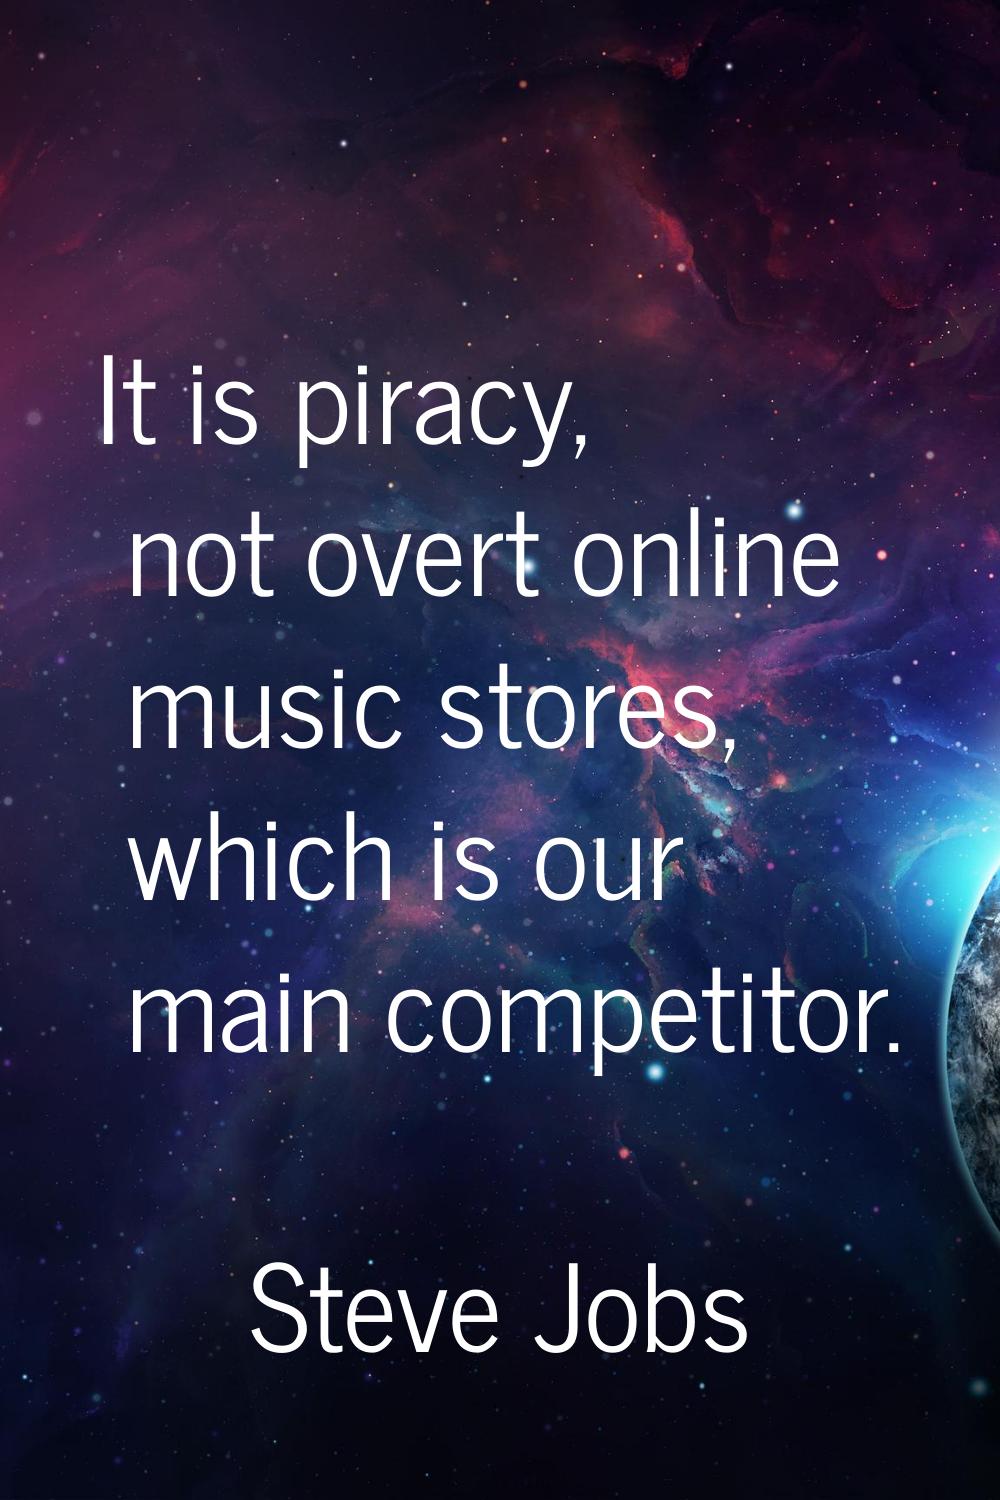 It is piracy, not overt online music stores, which is our main competitor.